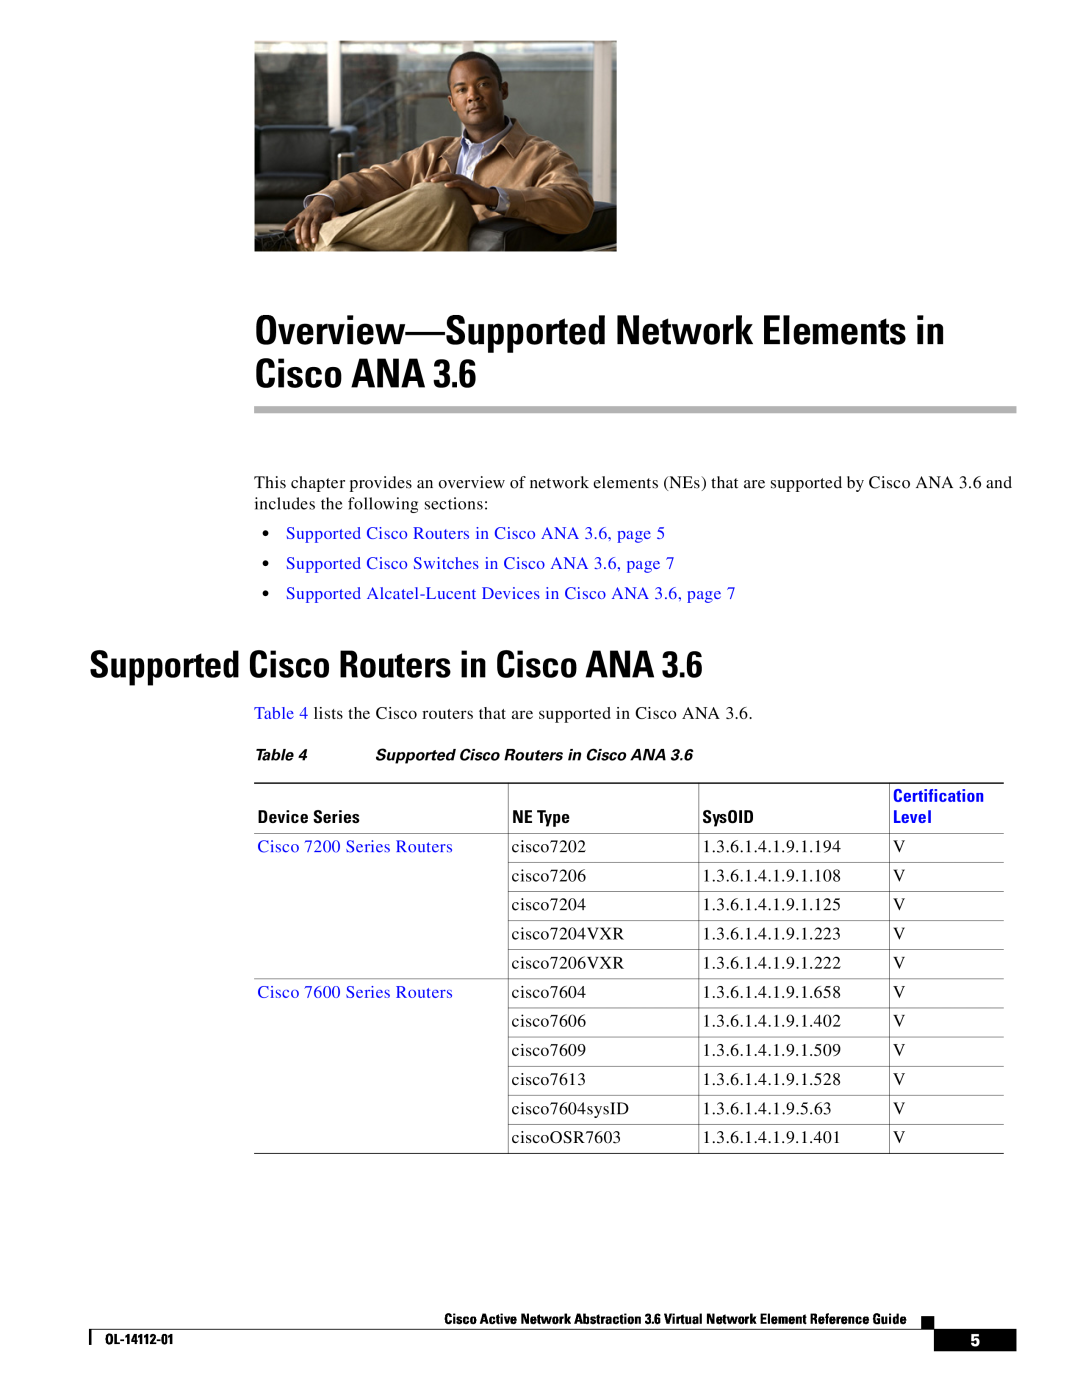 Cisco Systems manual Supported Cisco Routers in Cisco ANA 3.6, page, Certification, Device Series, NE Type, SysOID 